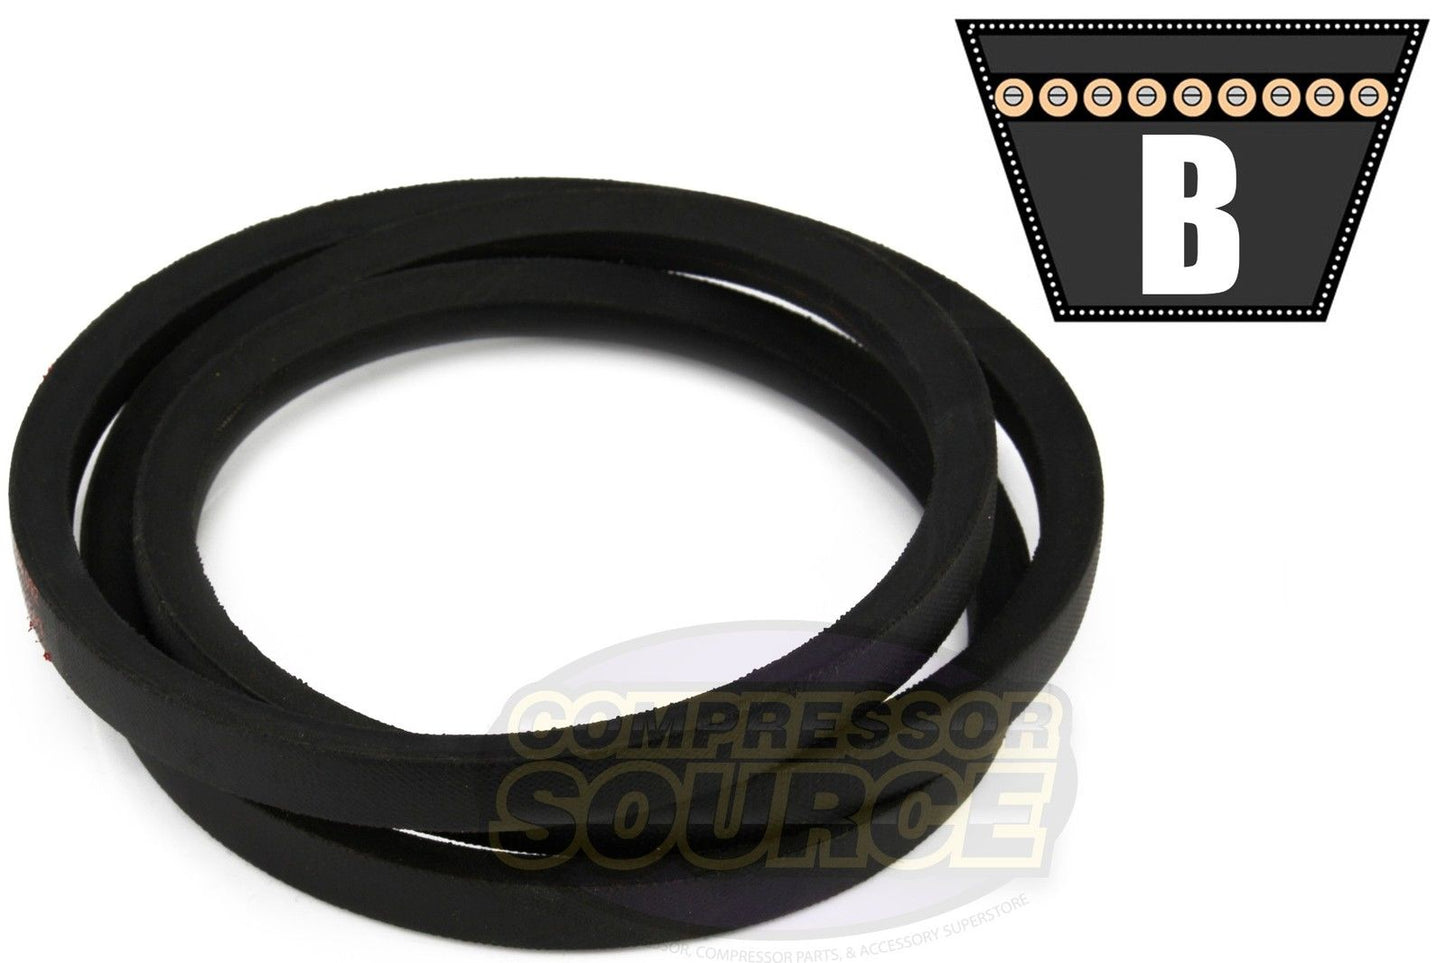 B71 Replacement High Quality Industrial & Lawn Mower 5/8" x 74"  V Belt 5L740